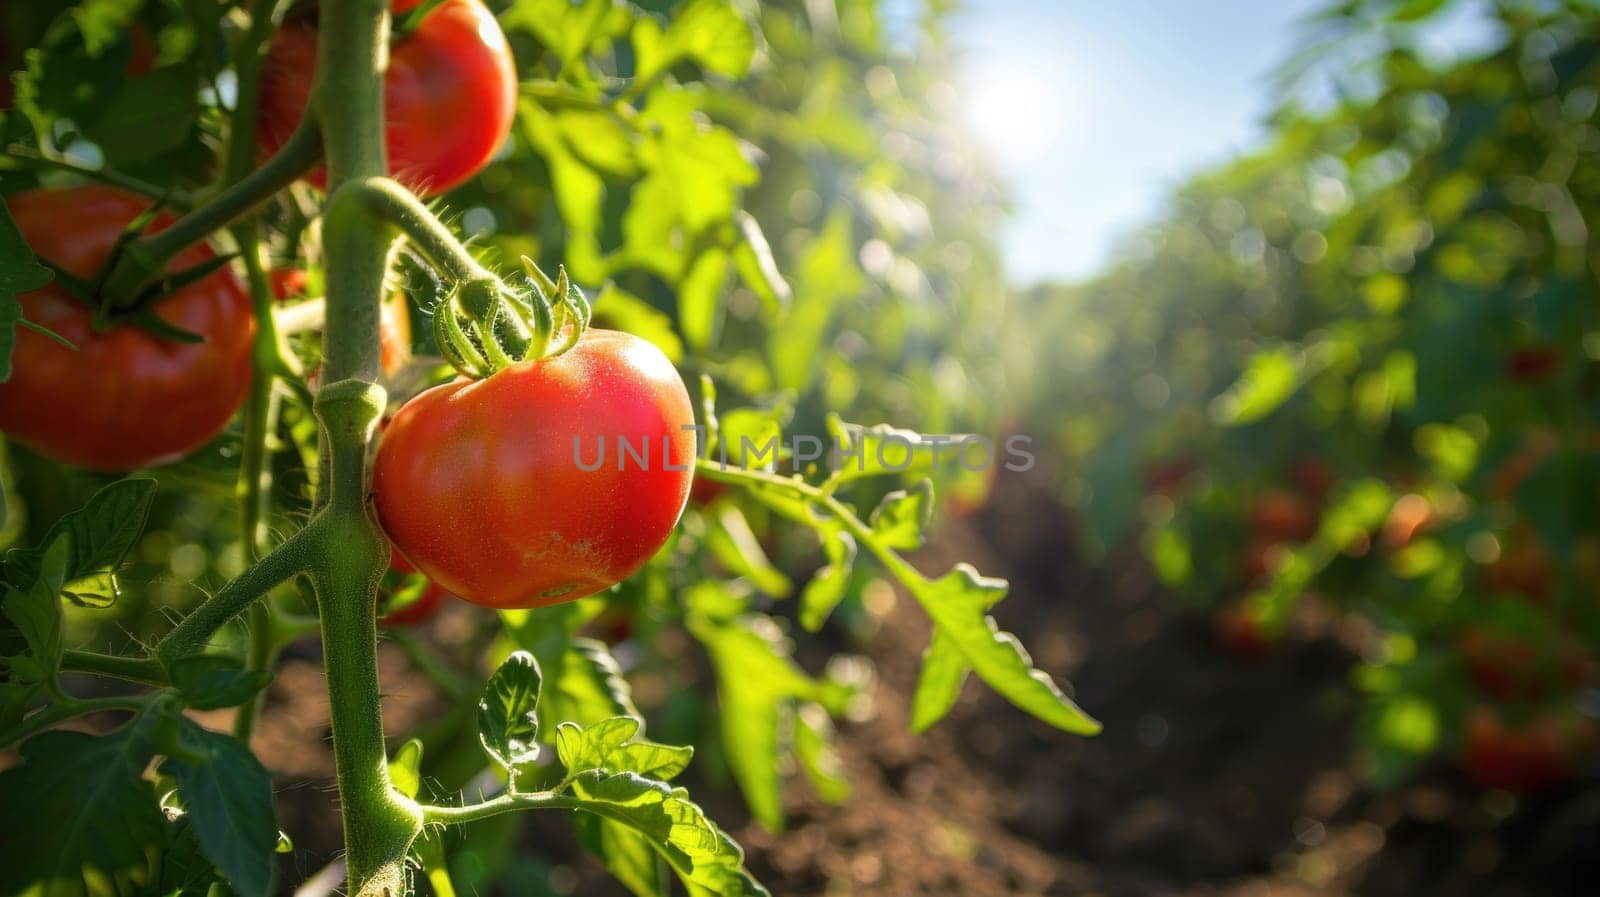 A tomato plant with a red tomato hanging from it by golfmerrymaker